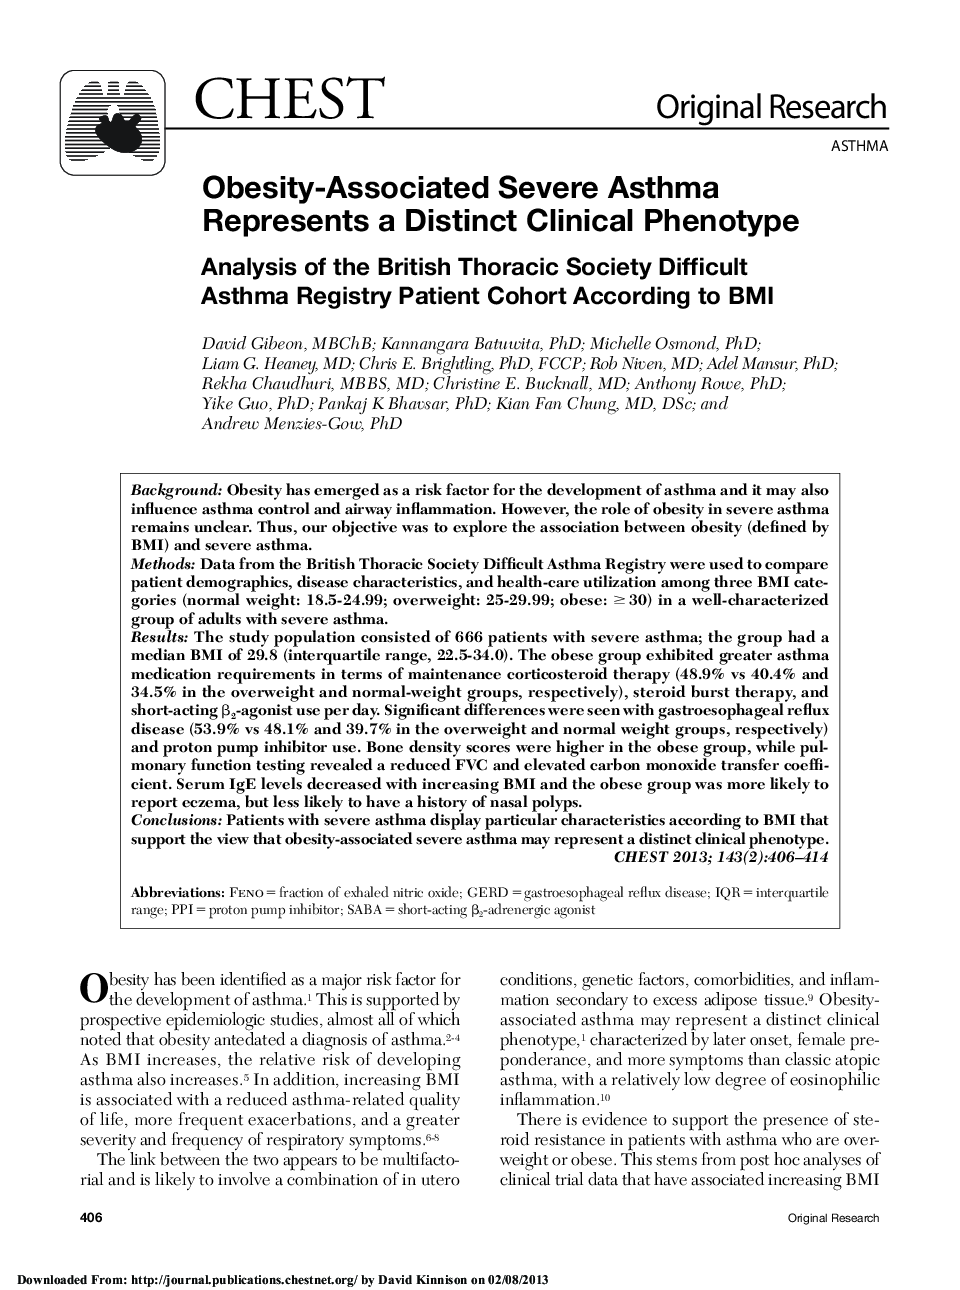 Obesity-Associated Severe Asthma Represents a Distinct Clinical Phenotype